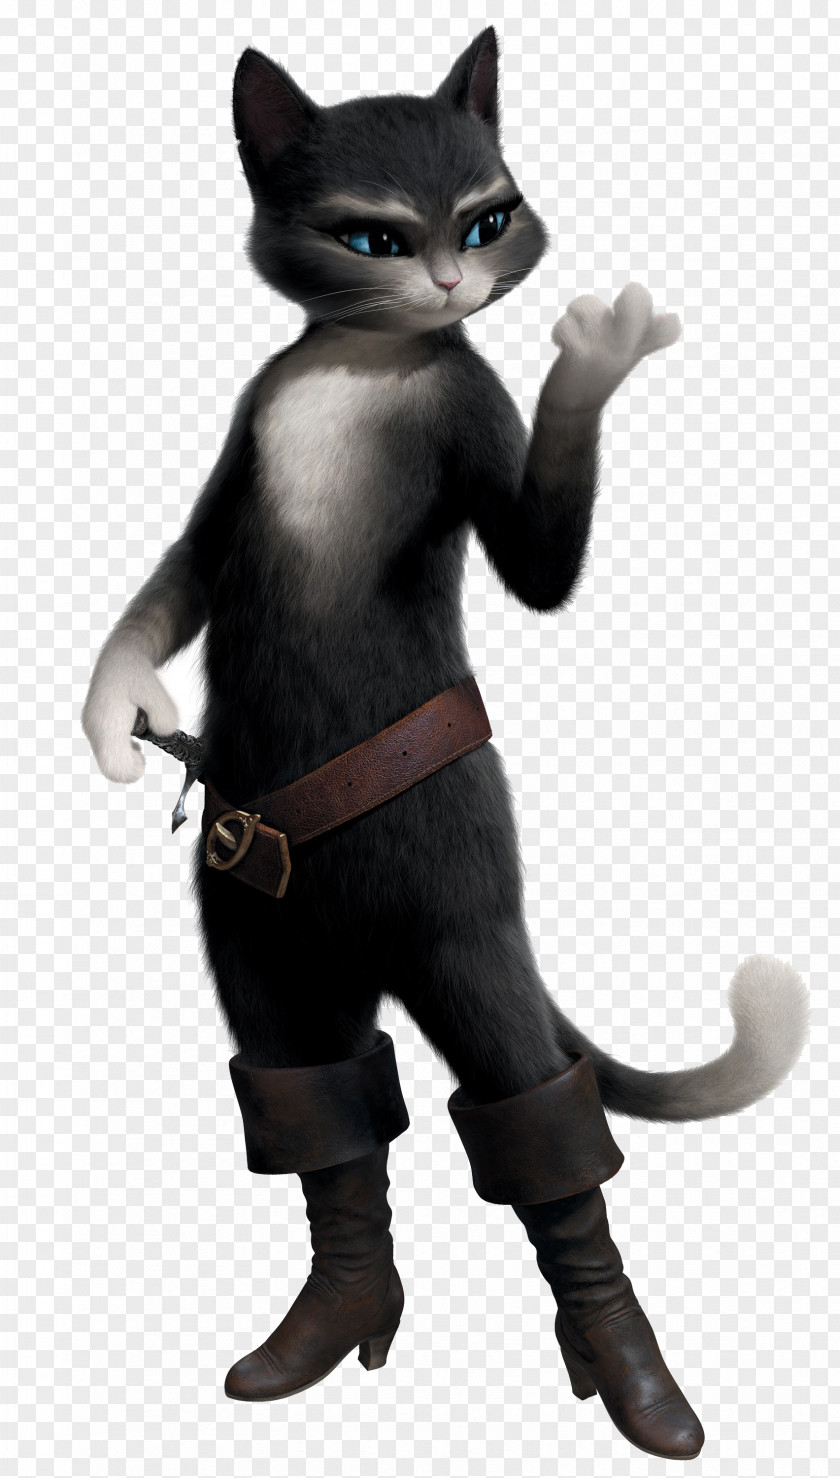 Puss In Boots Photos Donkey Kitty Softpaws Cat Adaptations Of DreamWorks PNG